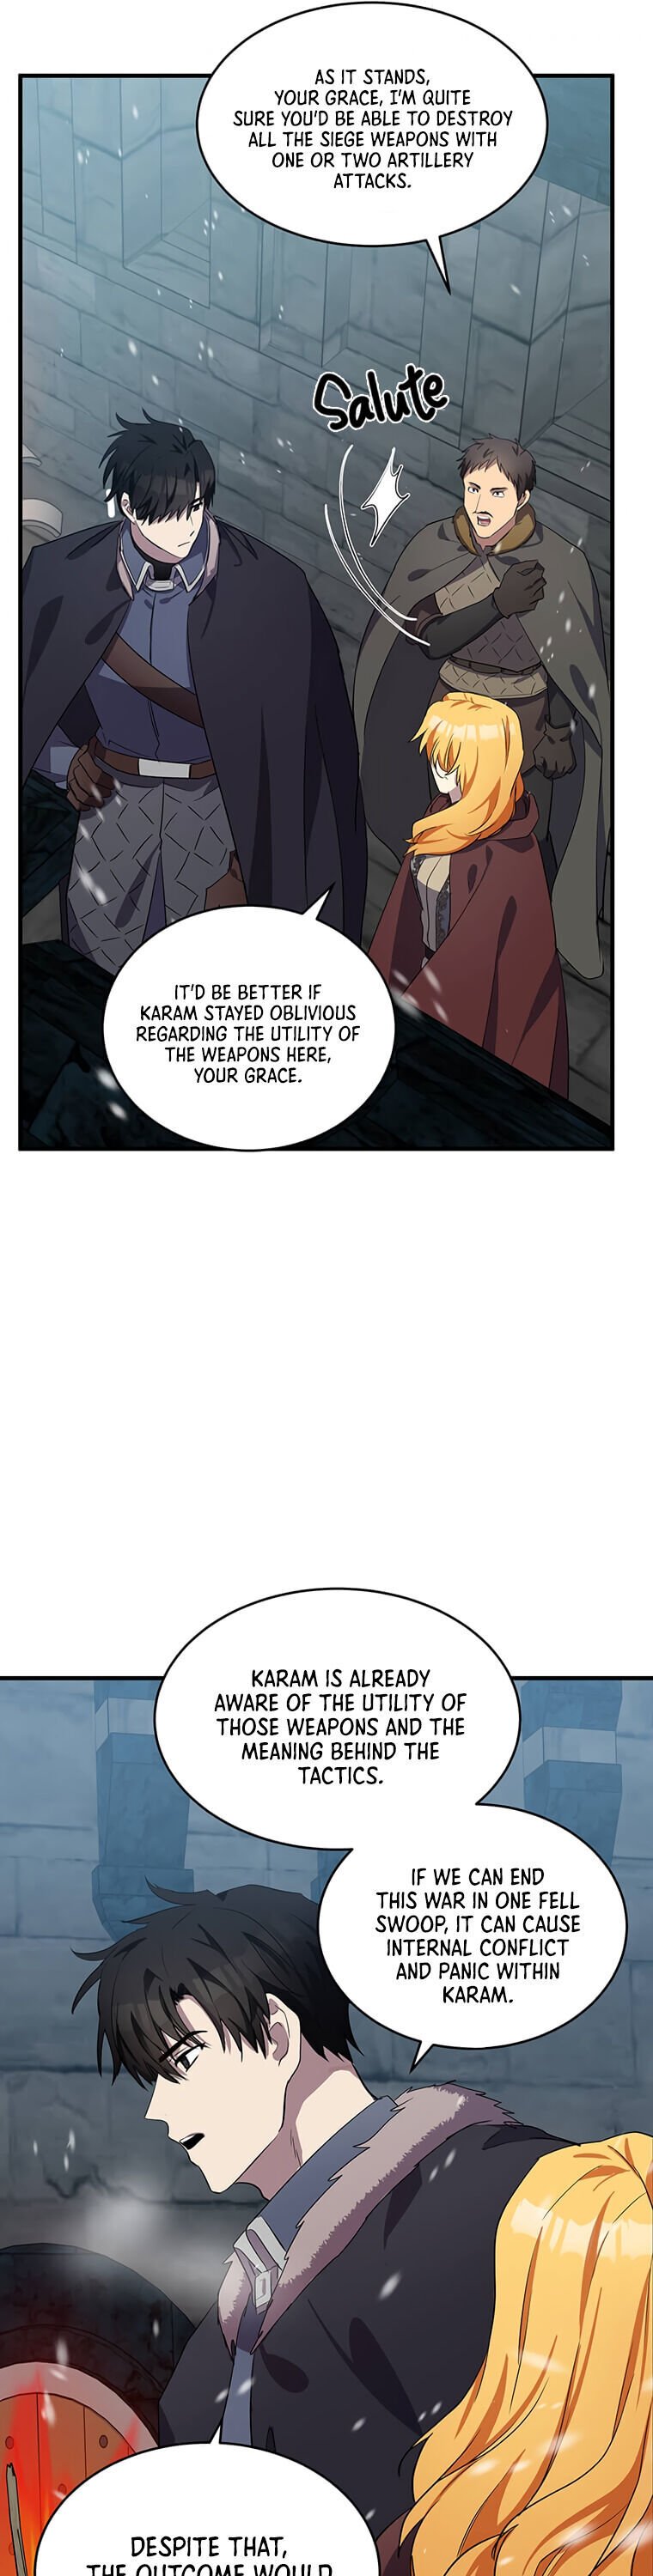 the-villainess-lives-twice-chap-81-2